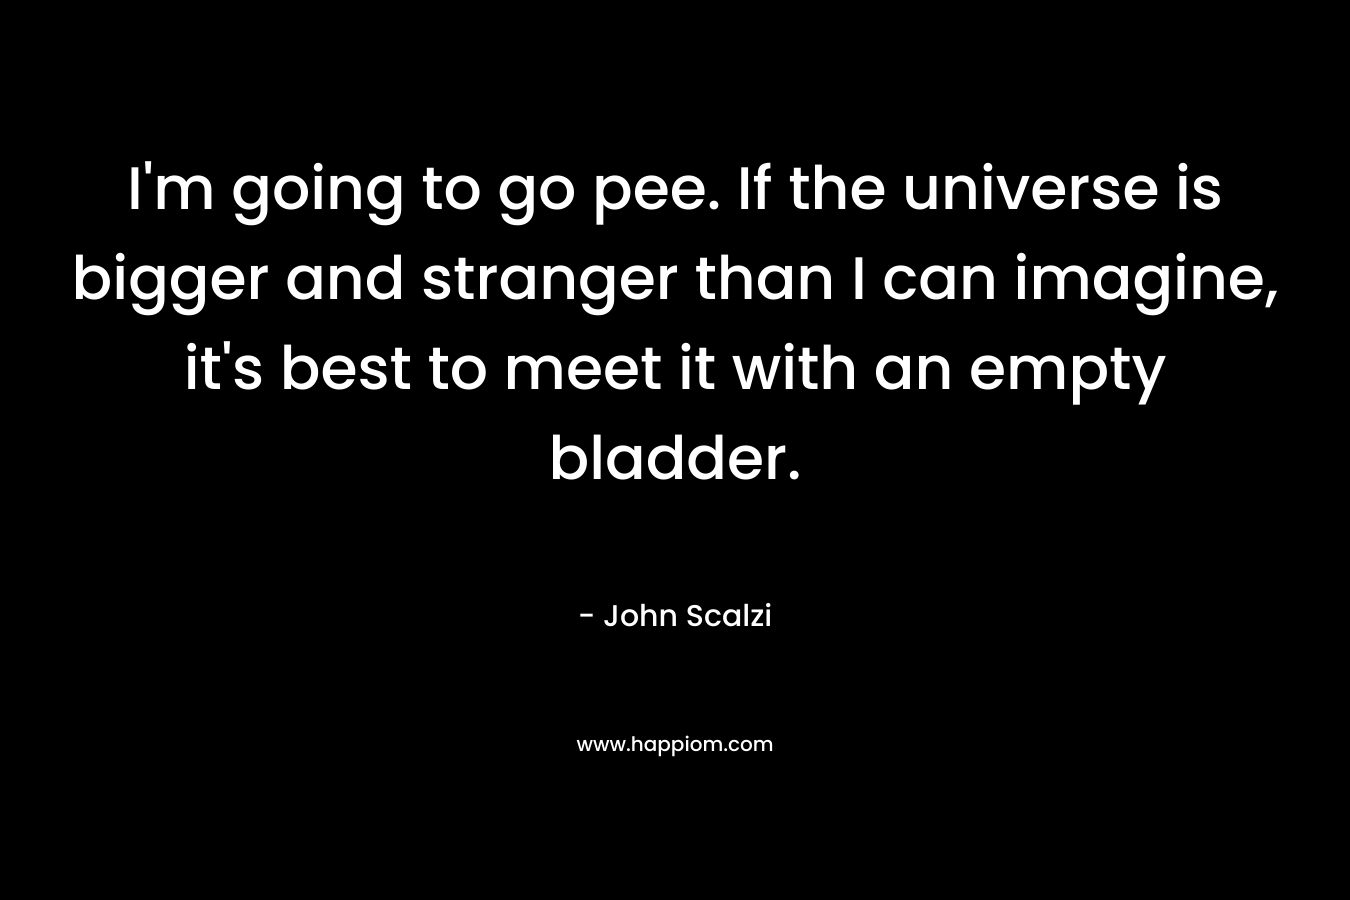 I'm going to go pee. If the universe is bigger and stranger than I can imagine, it's best to meet it with an empty bladder.